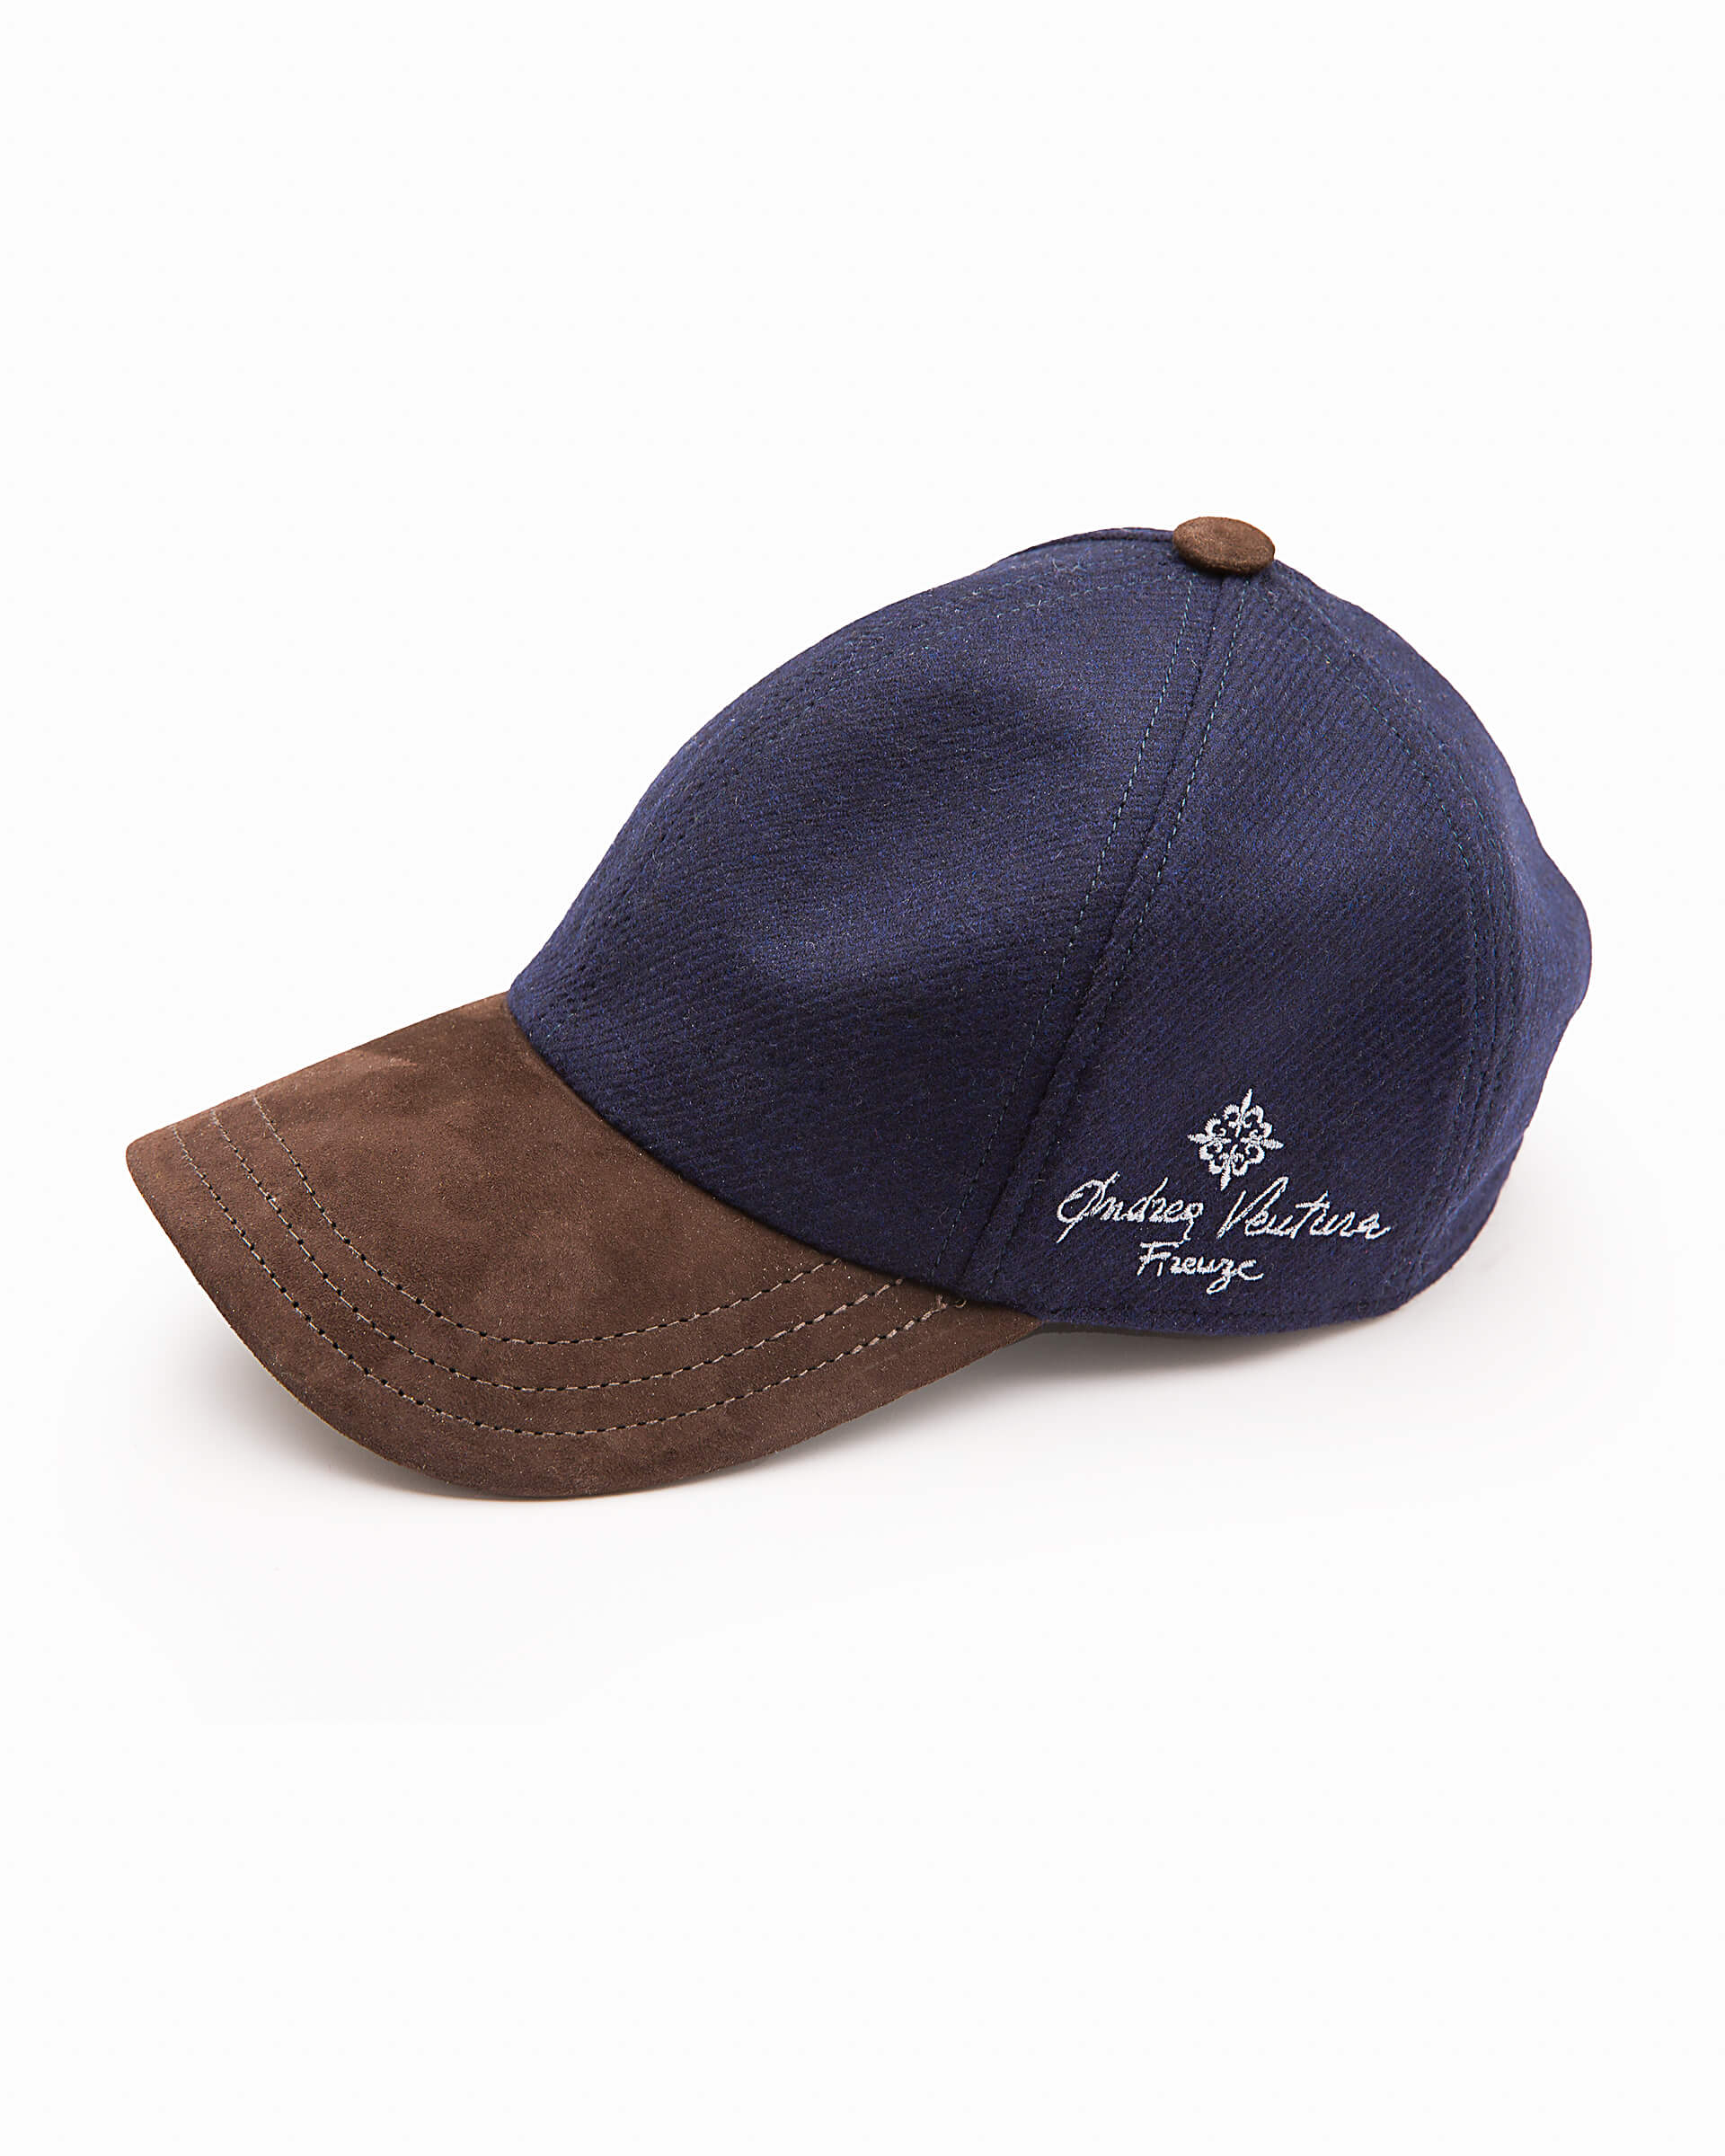 Baseball cap made of cashmere eclipse blue with water-repellent hat visor -  Andrea Ventura Firenze